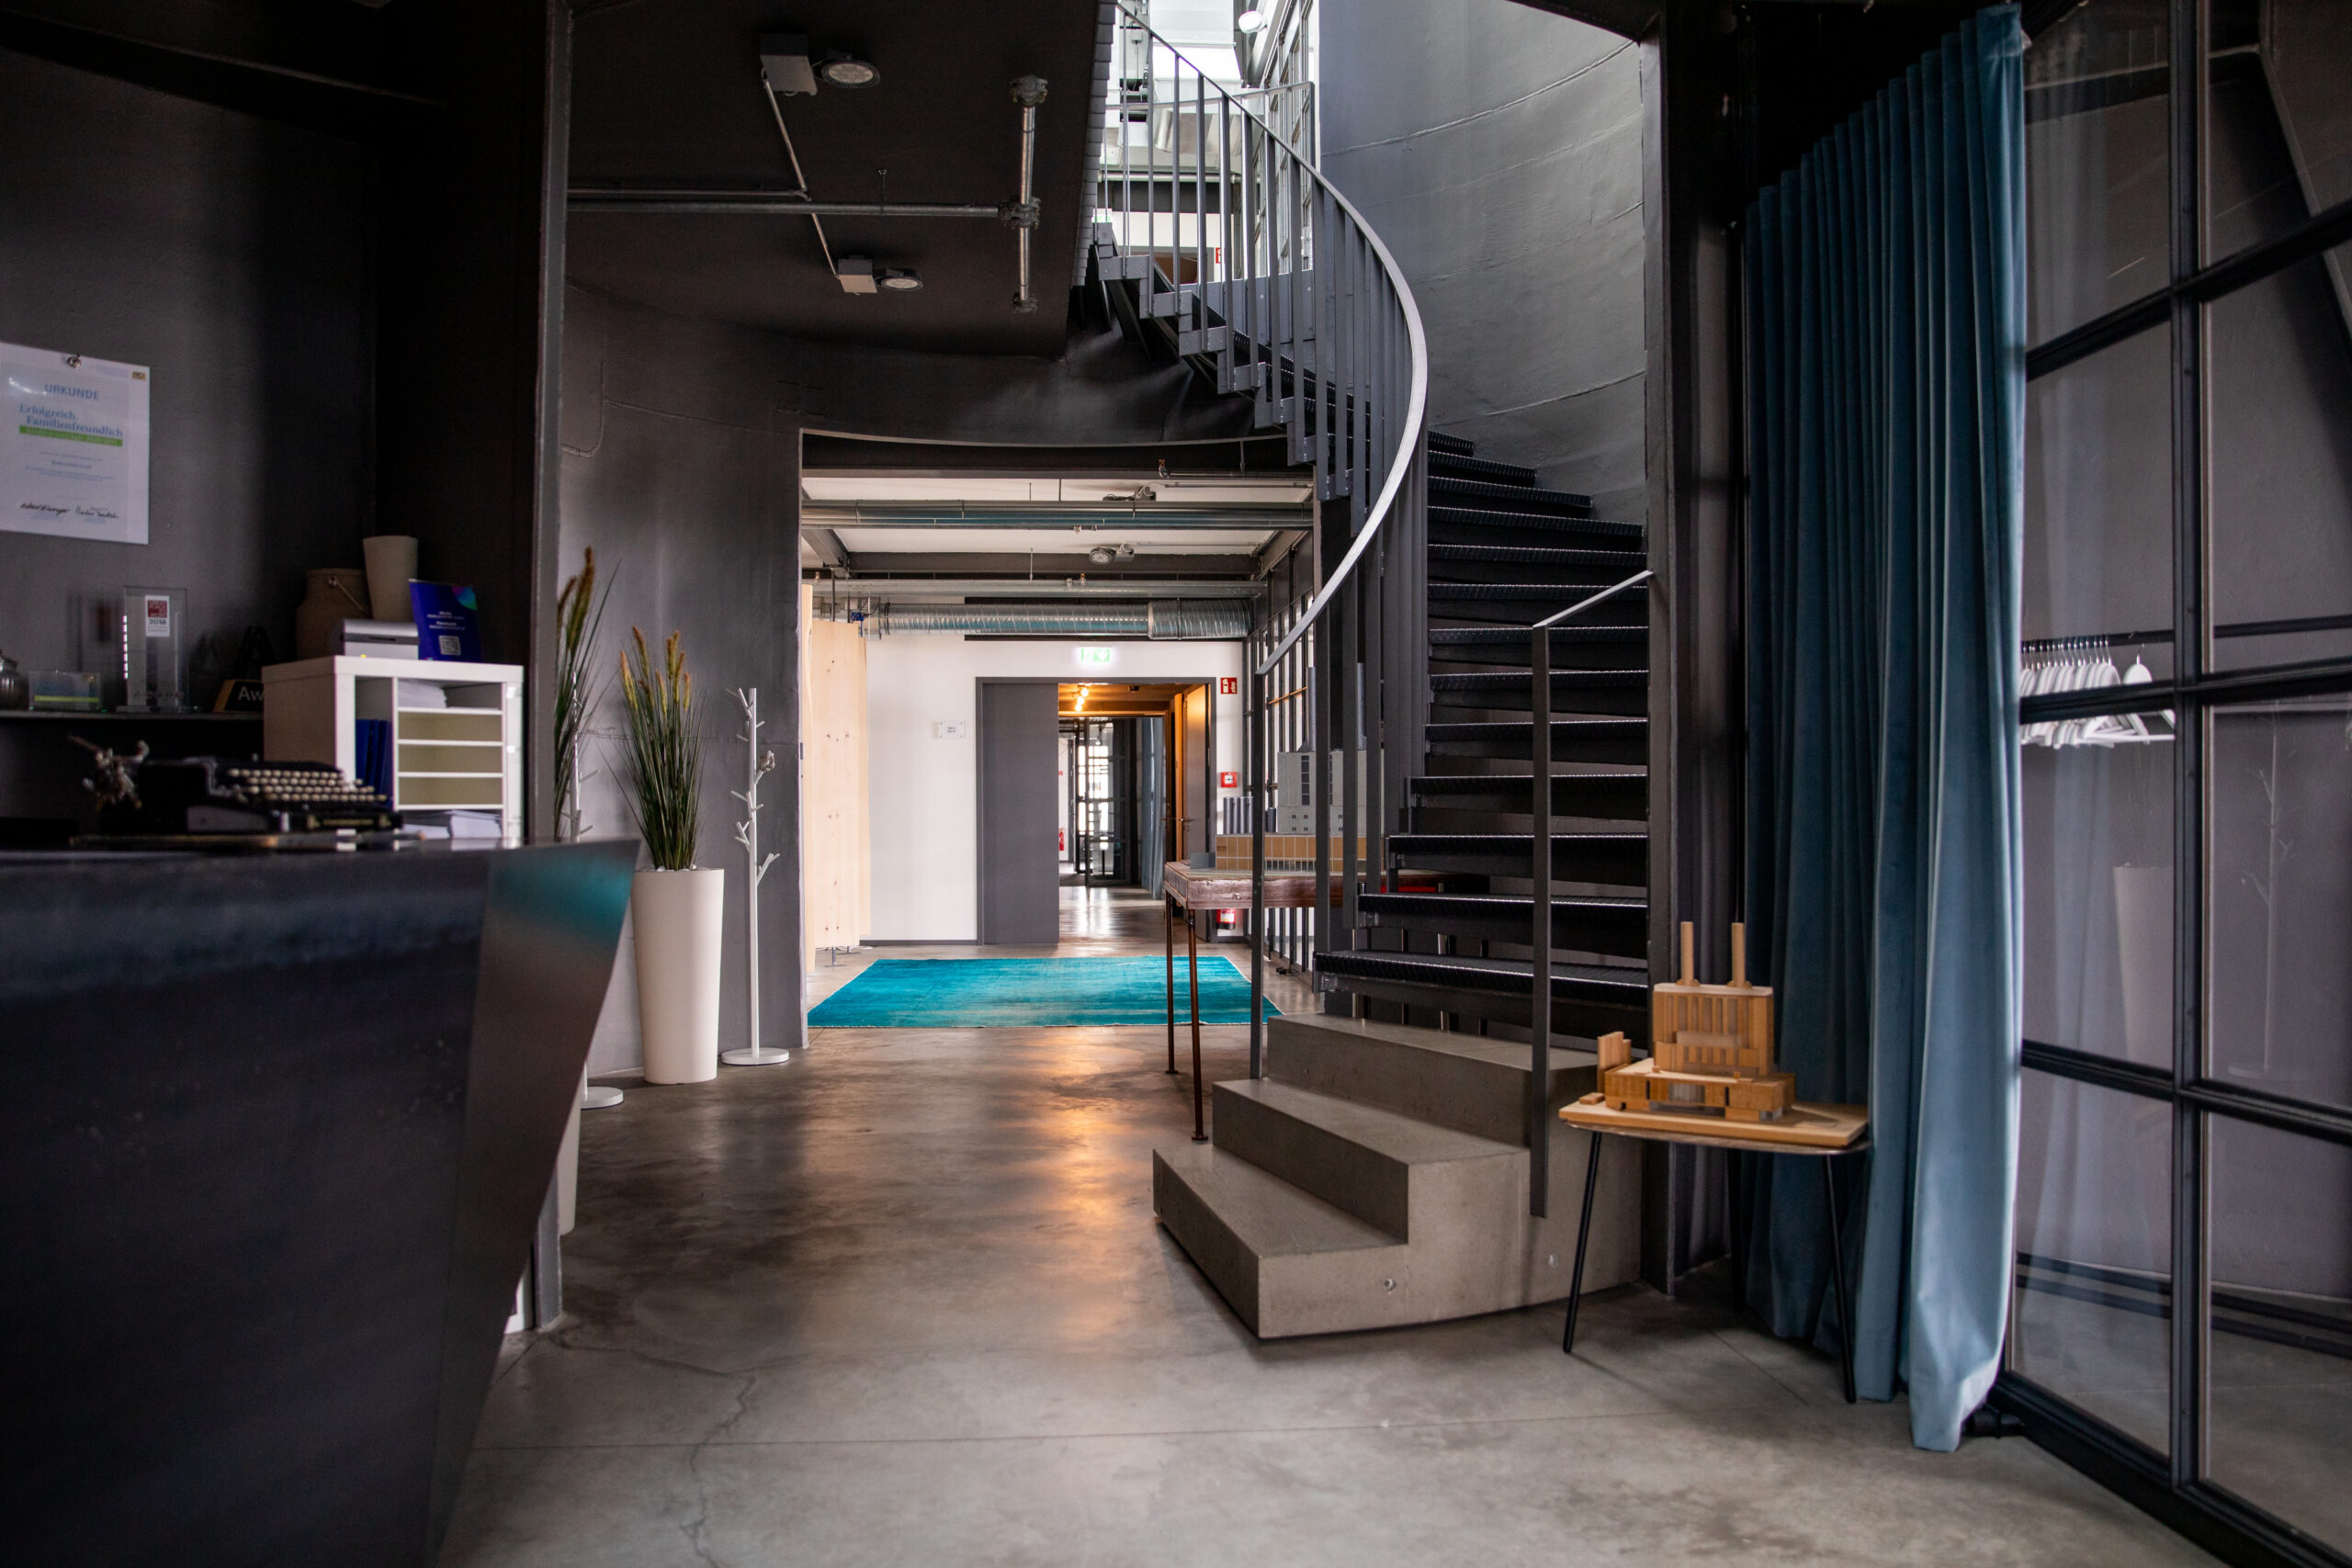 Photo showing the entrance to our Kraftwerk office in Munich. The ambience is loft-style. On the left you can see a counter, on the right a staircase leads up to another floor.